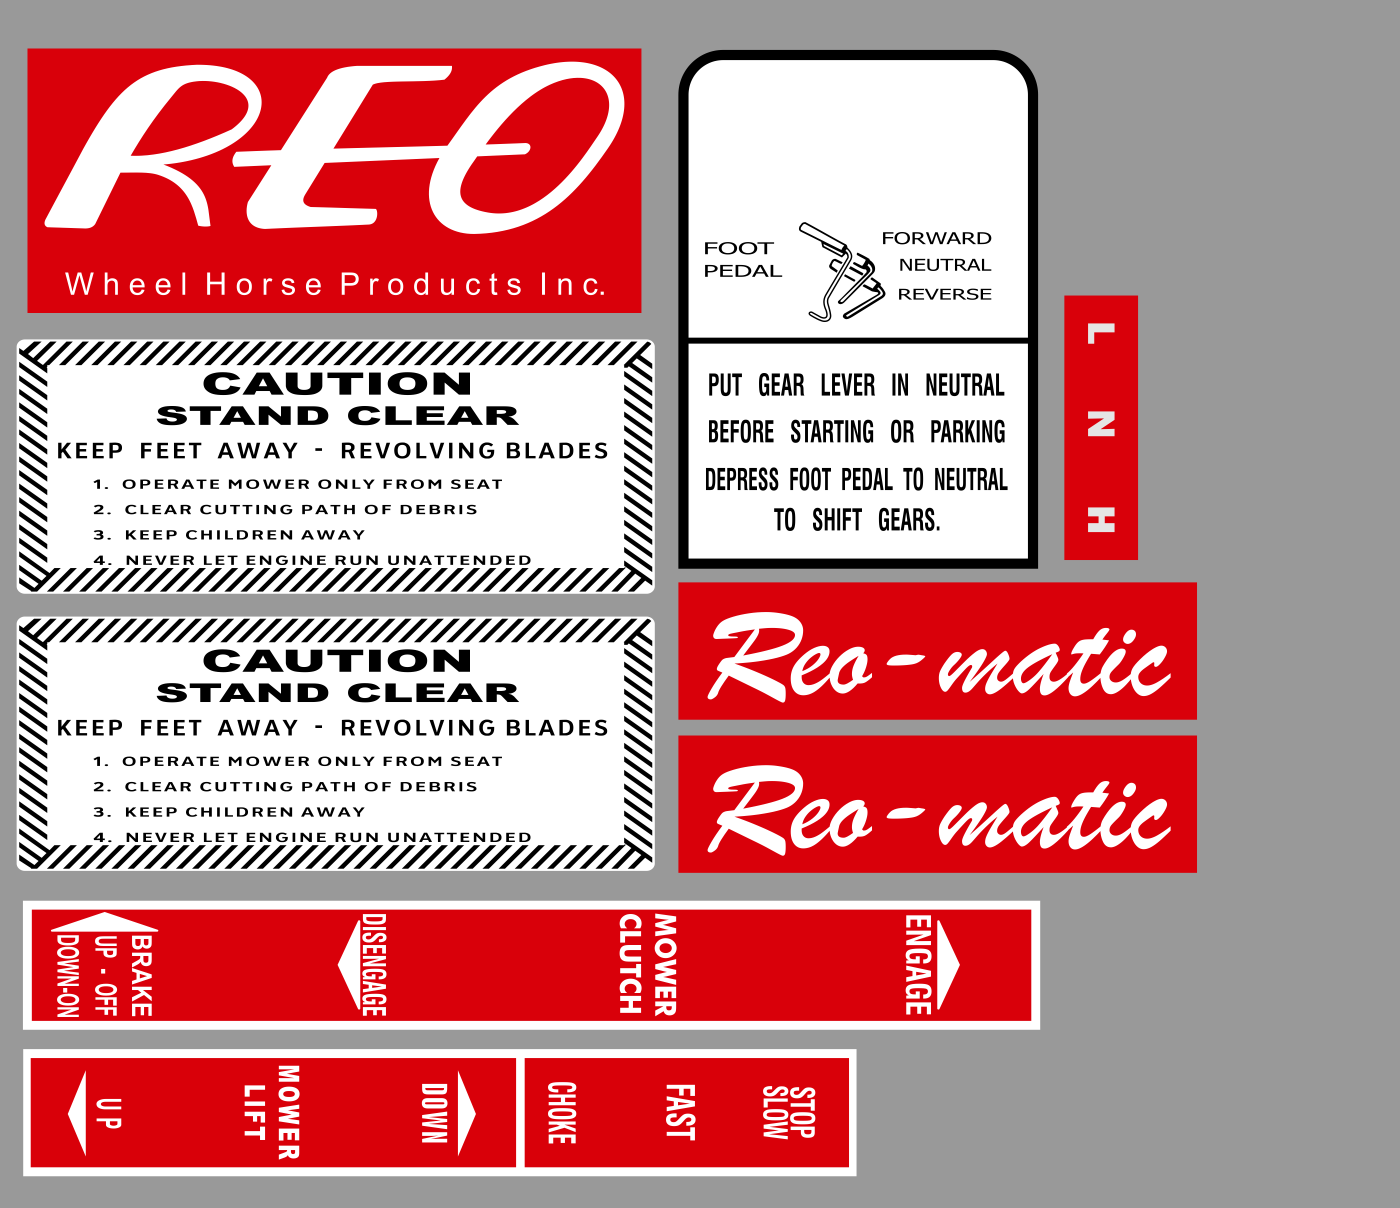 reo-matic-rear-engine-rider-chris-doyle-doyle80-yahoo-ready-to-print.png